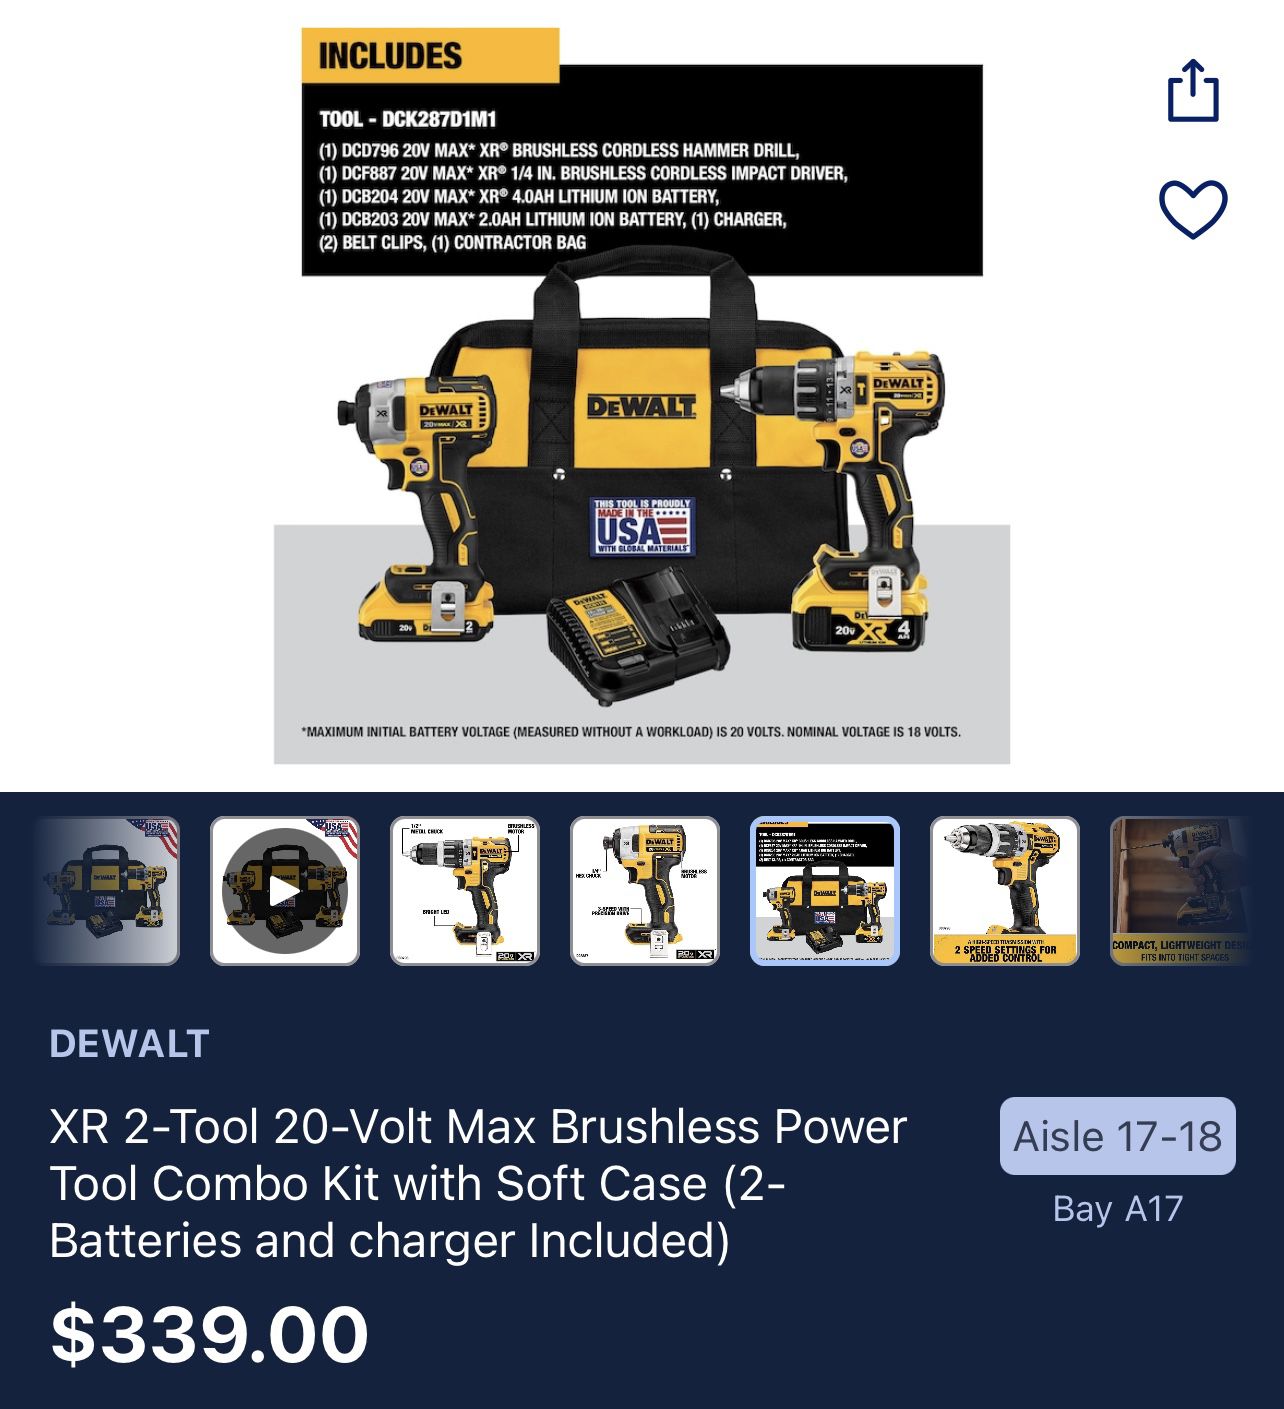 DEWALT DRILL SET XR 2-Tool 20-Volt Max Brushless Power Tool Combo Kit  with Soft Case (2- Batteries and charger Included) for Sale in Lake View  Terrace, CA OfferUp